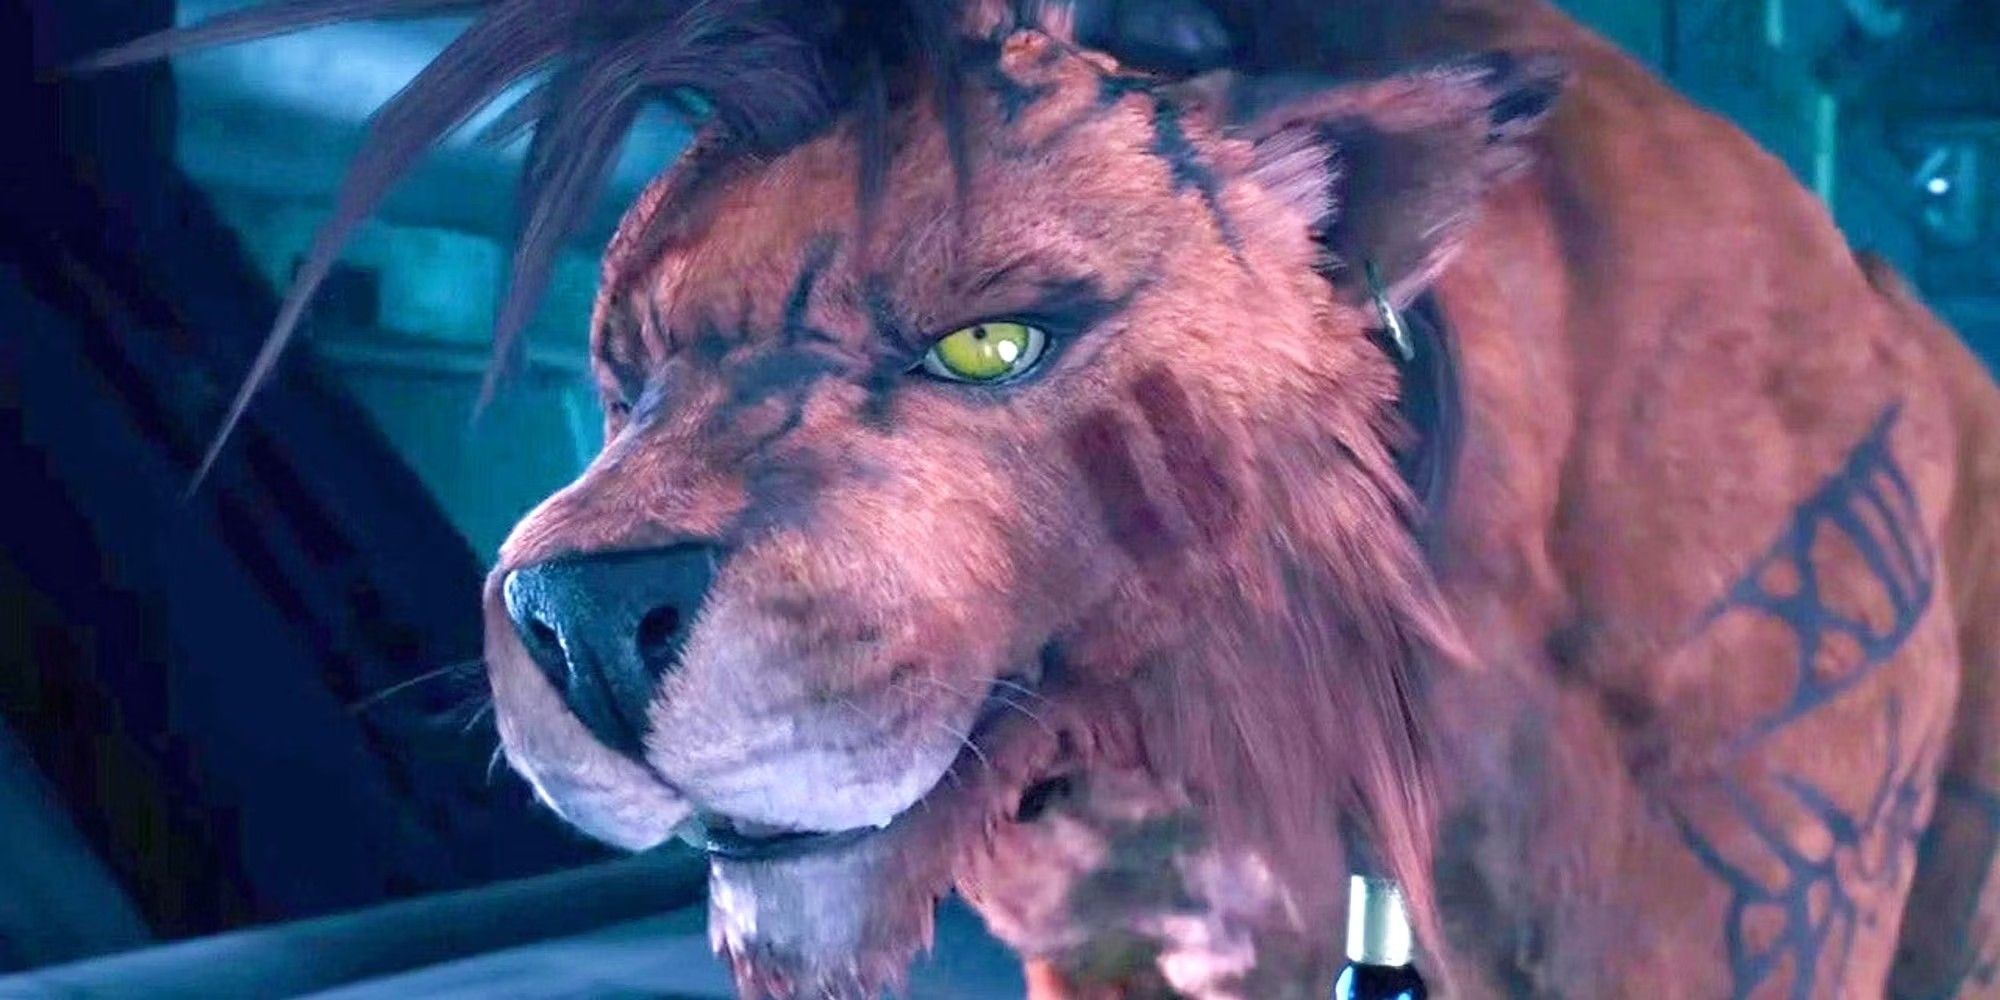 A close up of Red XIII showing his markings